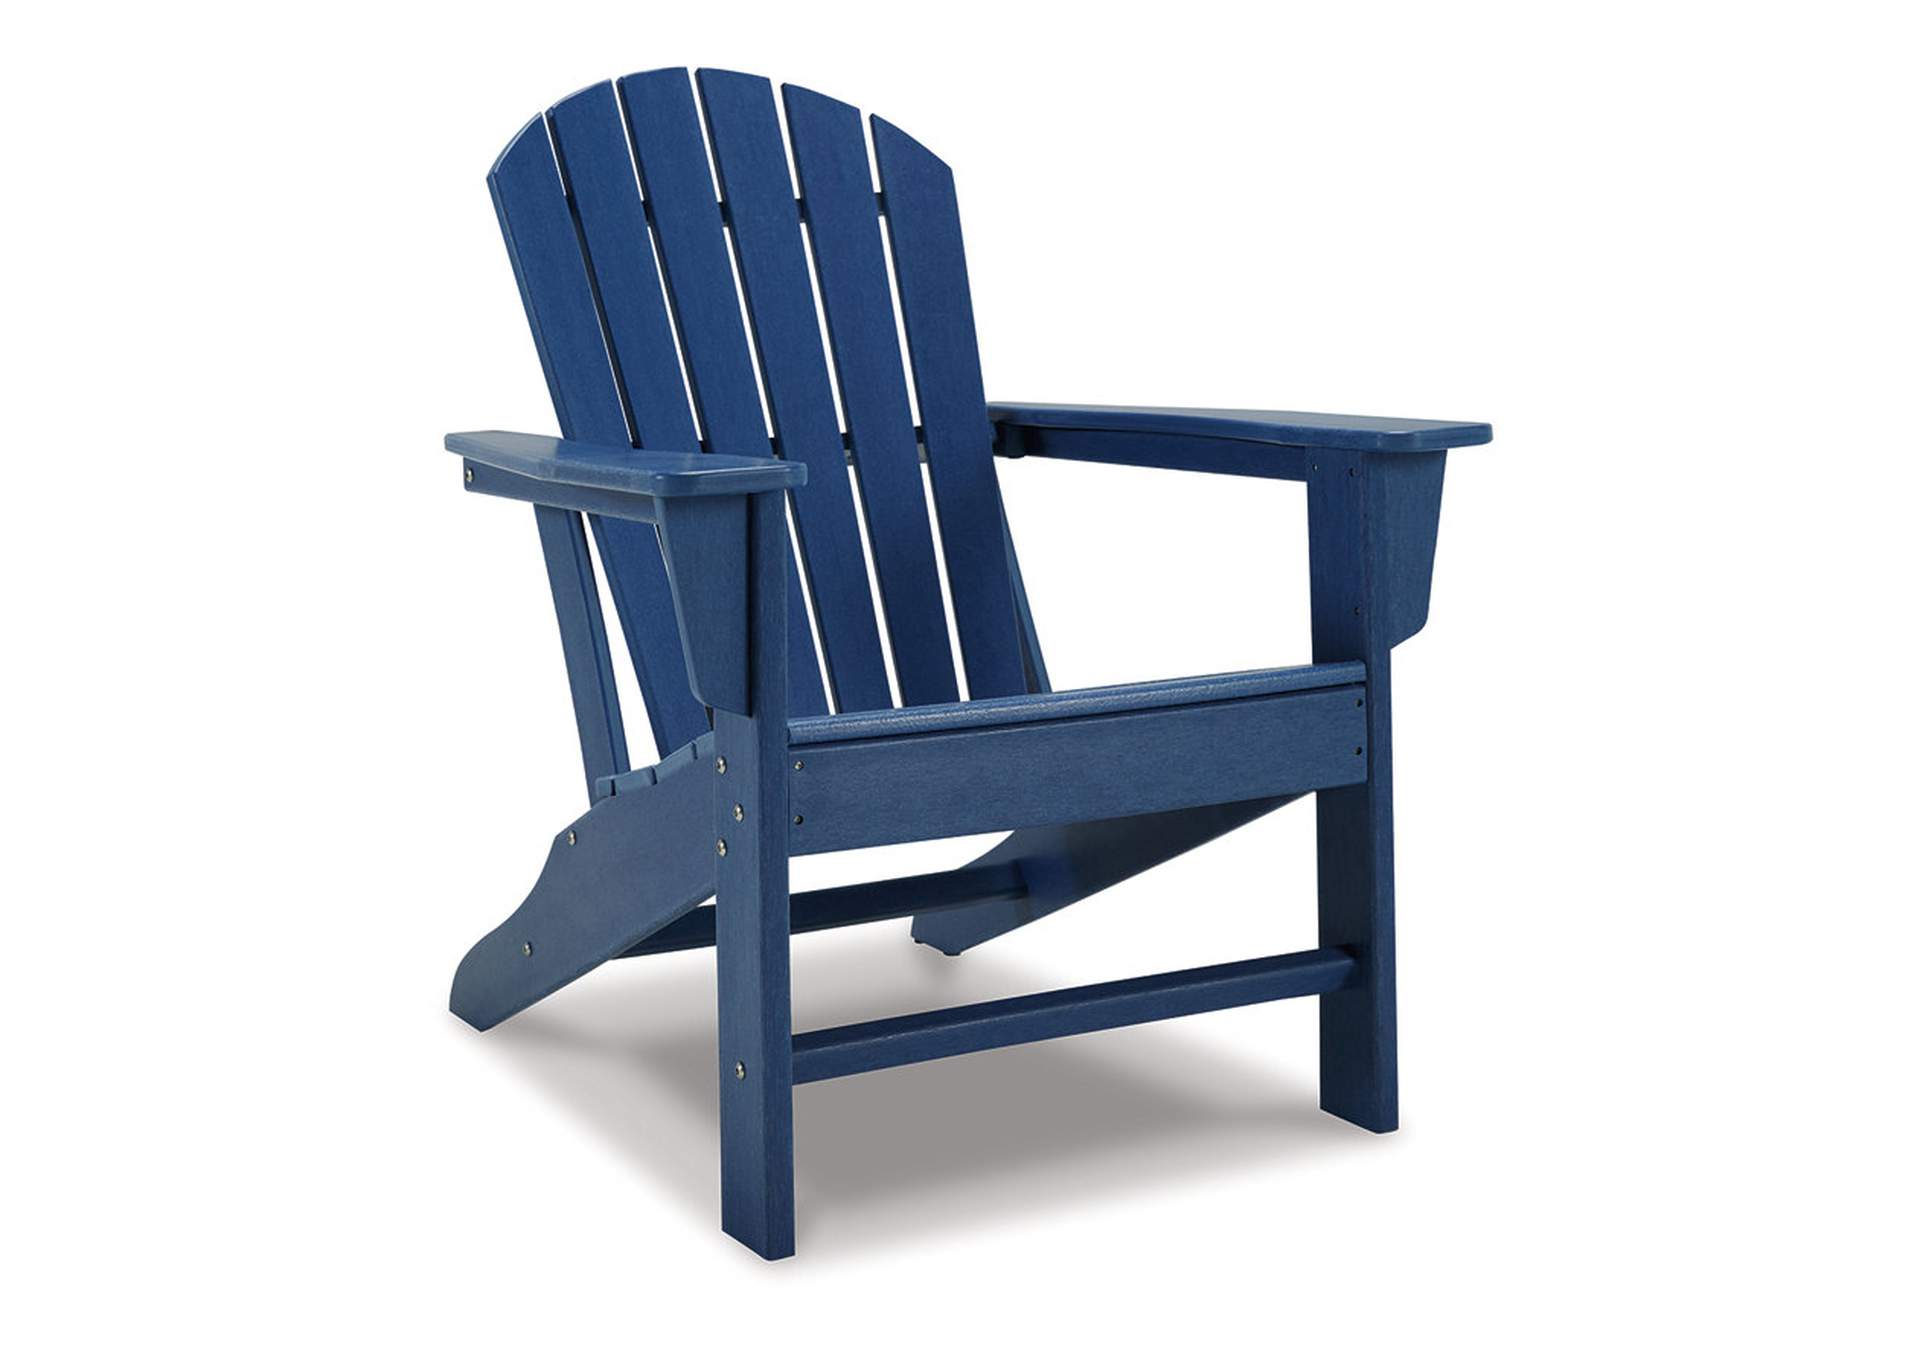 Sundown Treasure 2 Adirondack Chairs with End table,Outdoor By Ashley